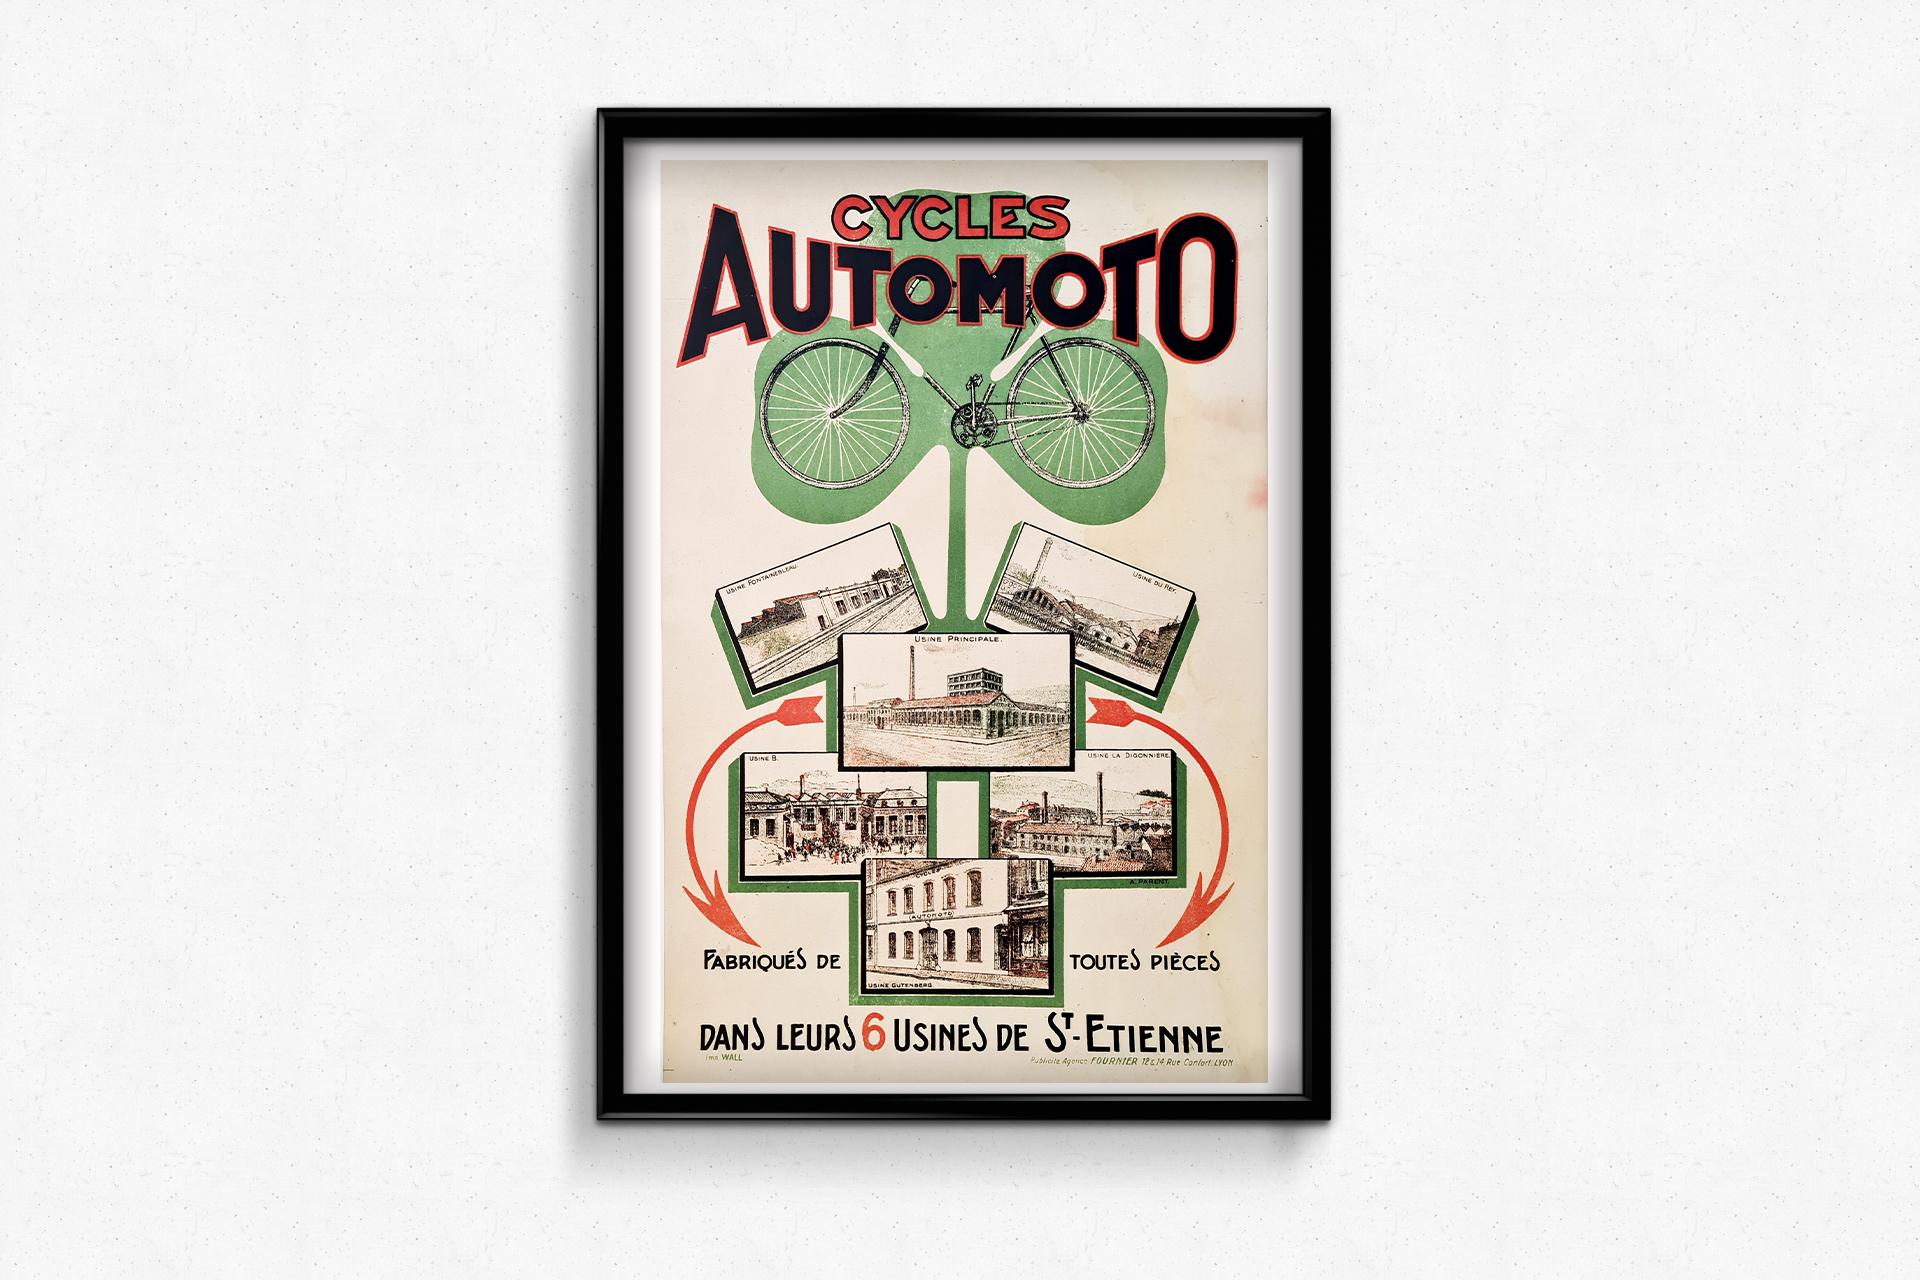 Circa 1900 rare original Poster for the brand Automoto Motorcycles and bicycles For Sale 1